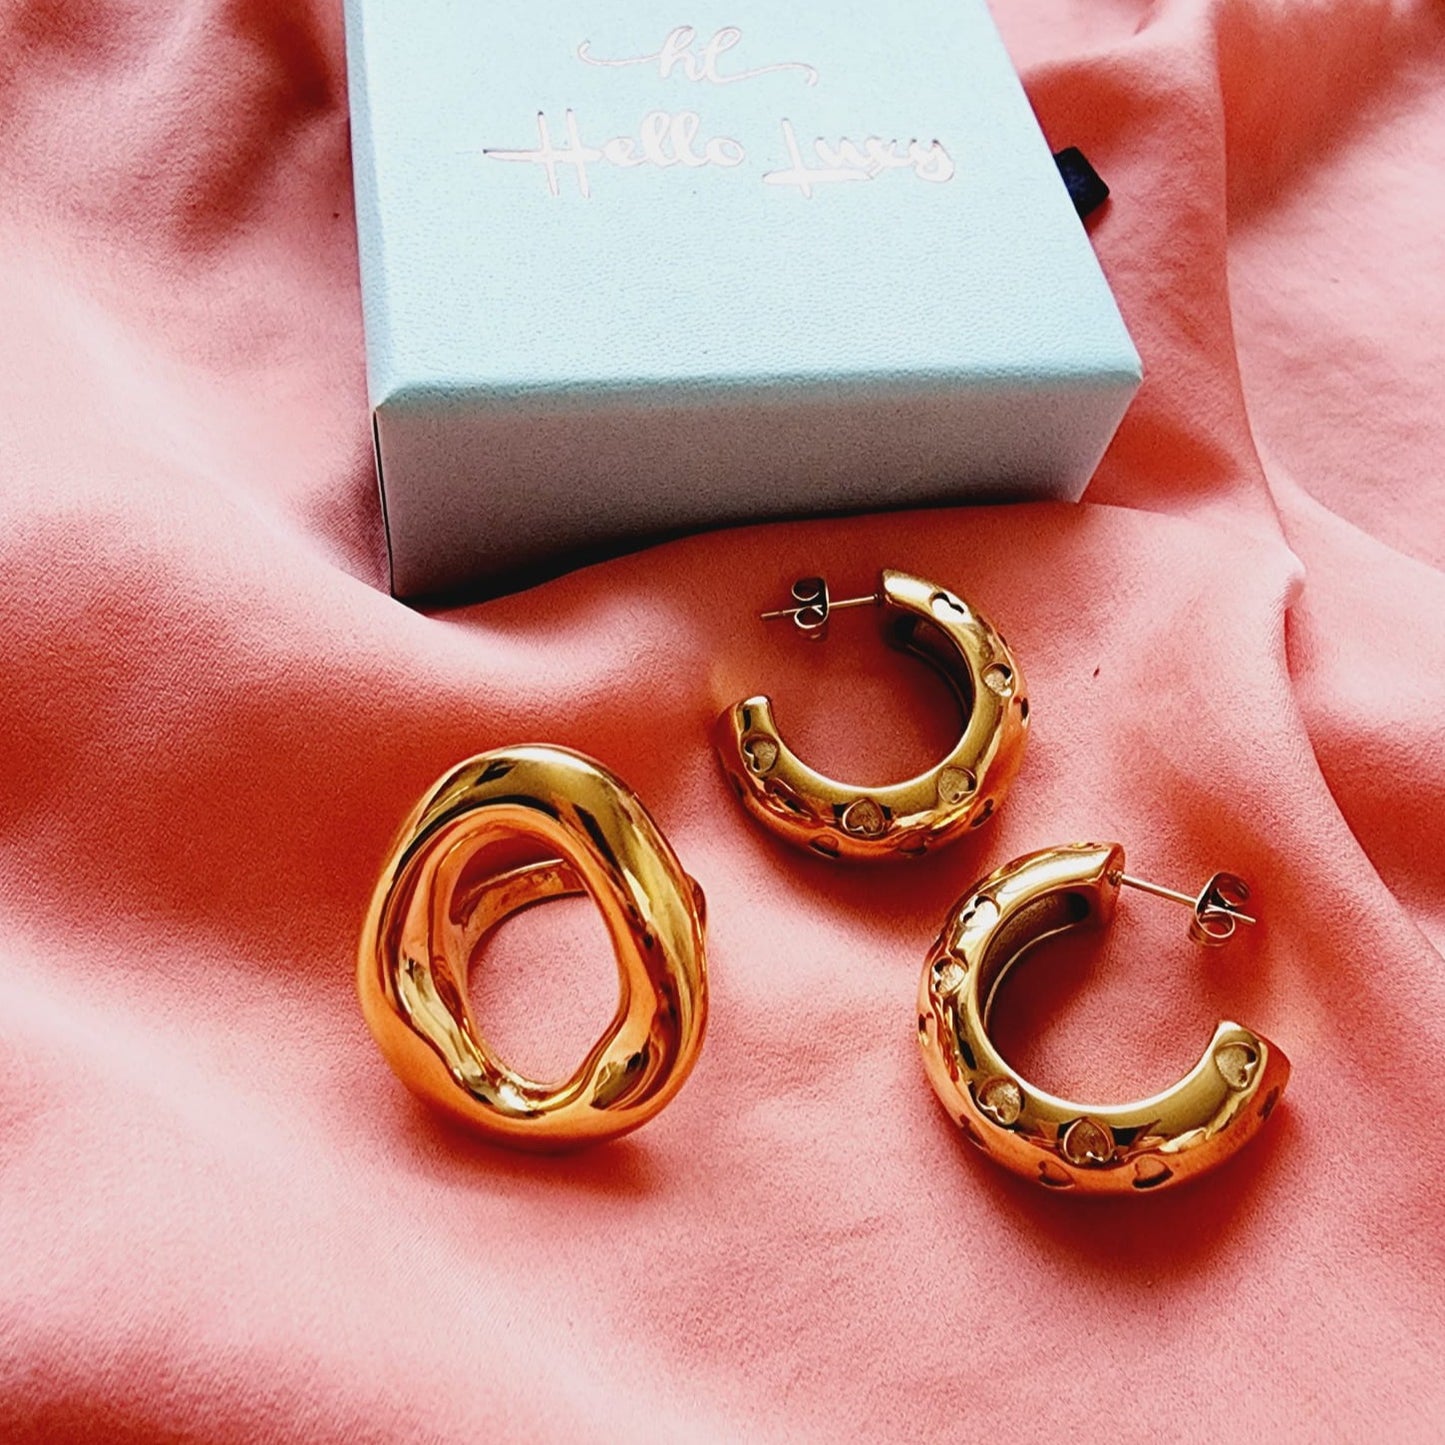 Geometric Bold ring, Water Resistant classy rings, Water Resistant simple rings, sweat resistant jewelry, water resistant minimalist jewelry, minimalist rings, promise gold rings, waterproof rings, stainless steel rings, 18k gold plated simple rings, 18k gold plated classy rings, 18k gold filled rings,gold vintage rings, tarnish free rings, stackable rings, dainty abstract rings, dainty chunky rings, Unique Stylish Ring, Statement large ring, Big Irregular Ring, Irregular Statement Ring